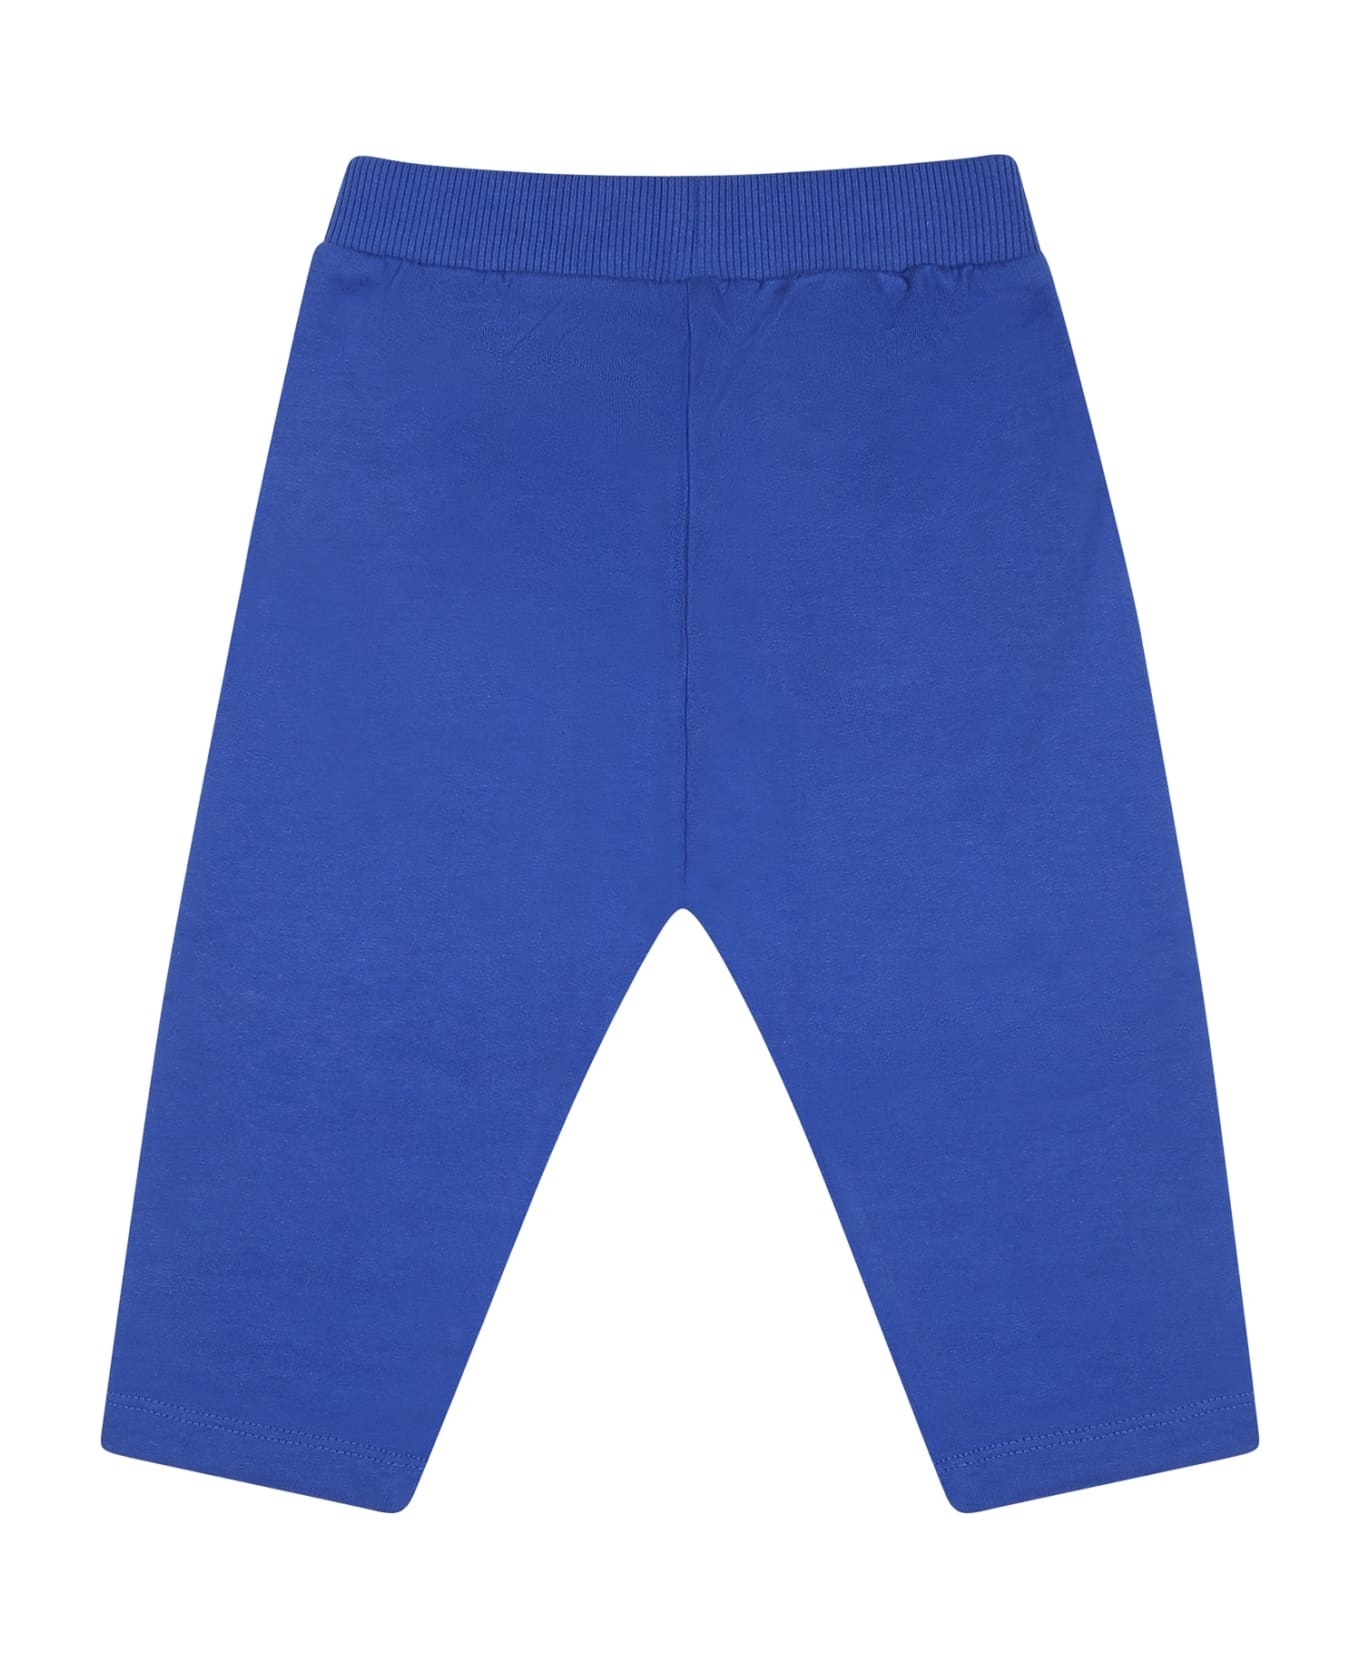 Moschino Blue Leggings For Babykids With Teddy Bears And Logo - Light Blue